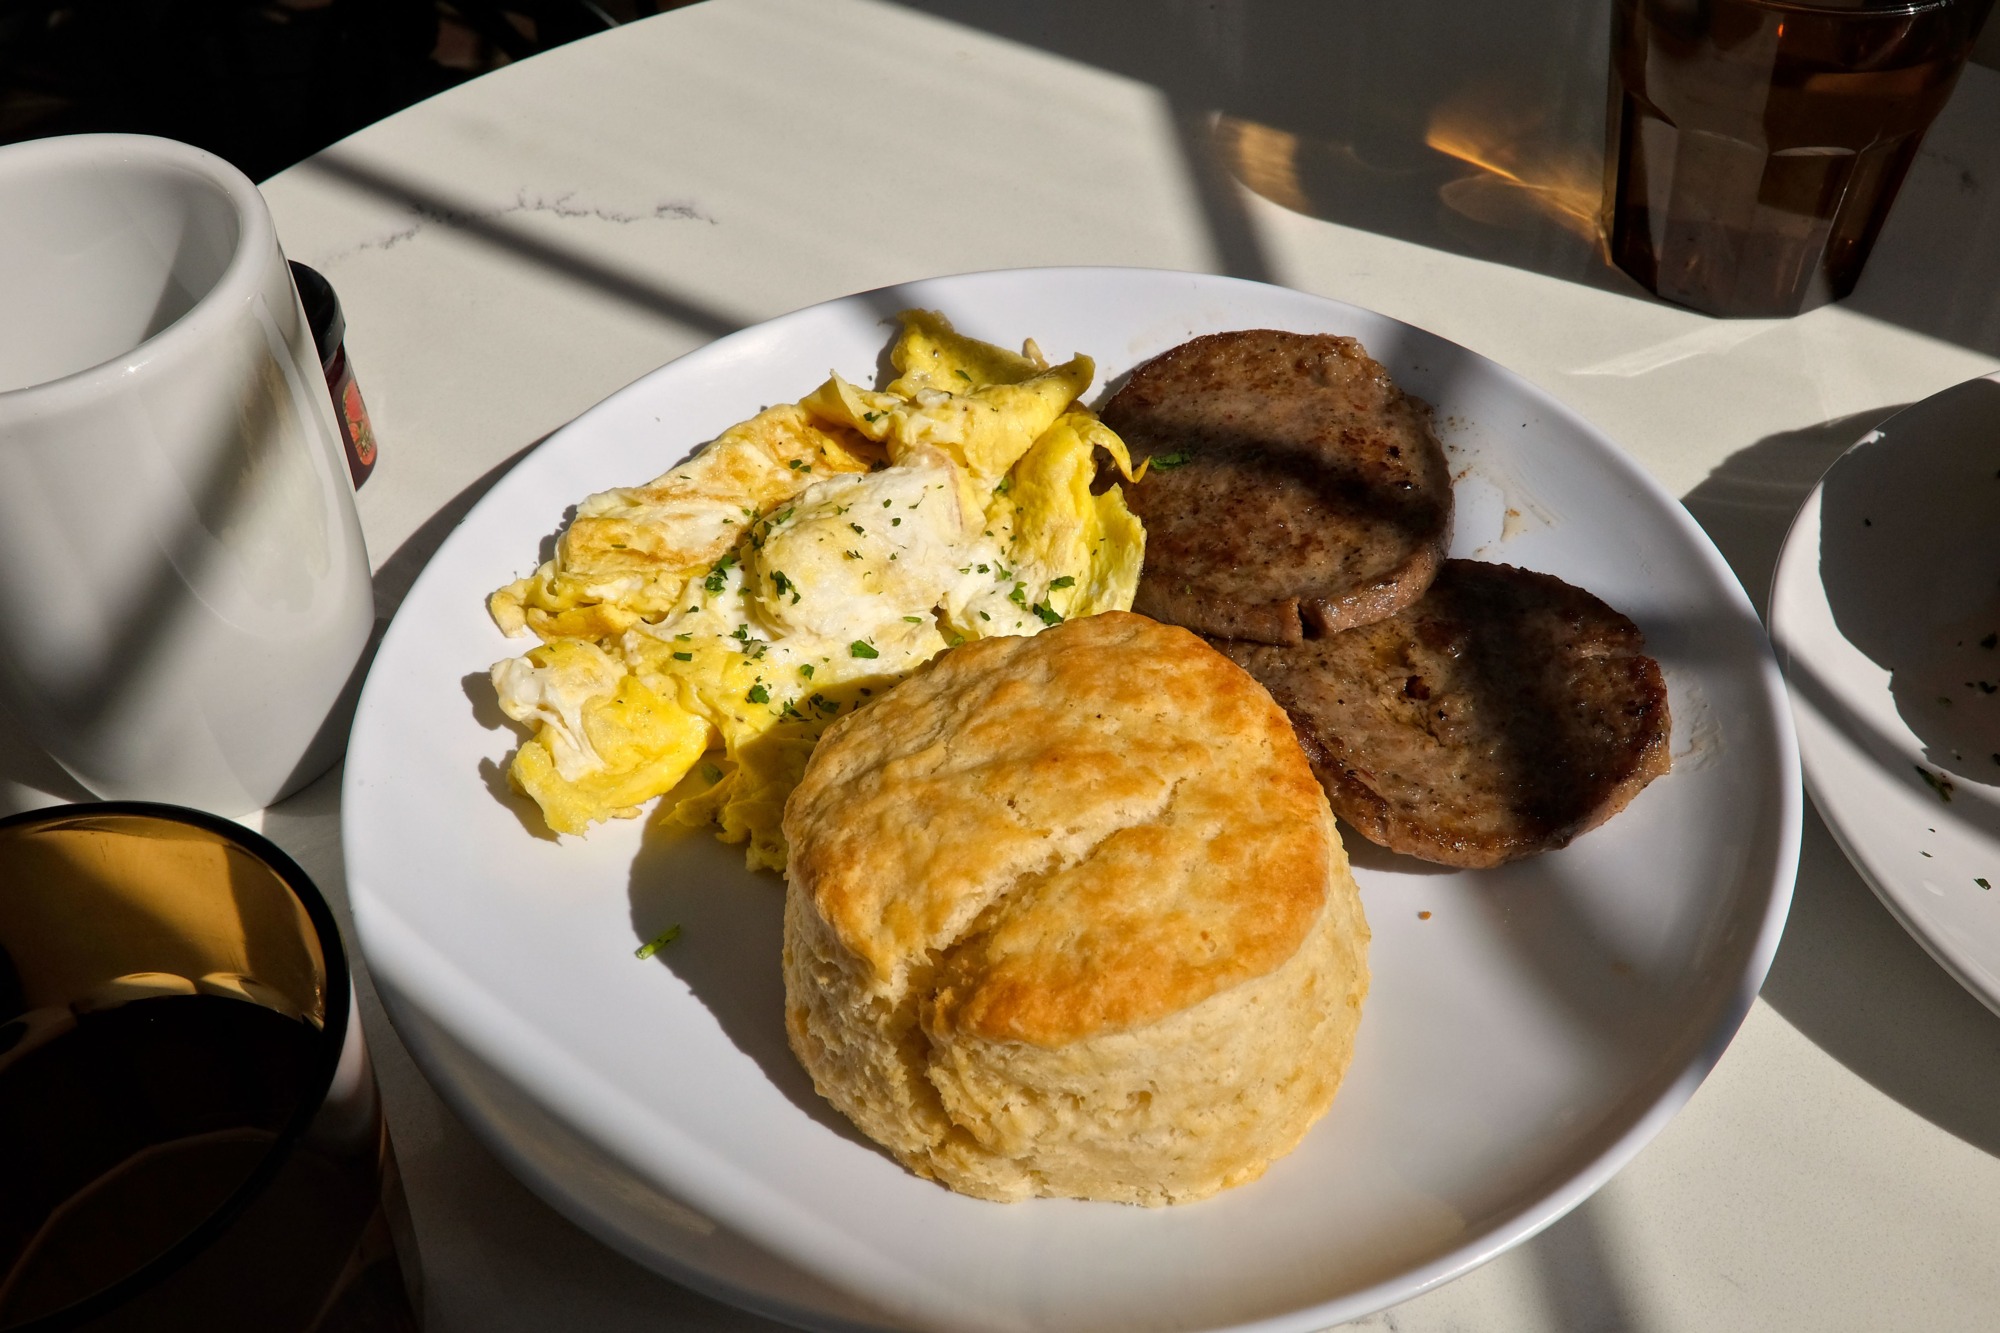 Eggs, sausage, and a biscuit on a light-filled table